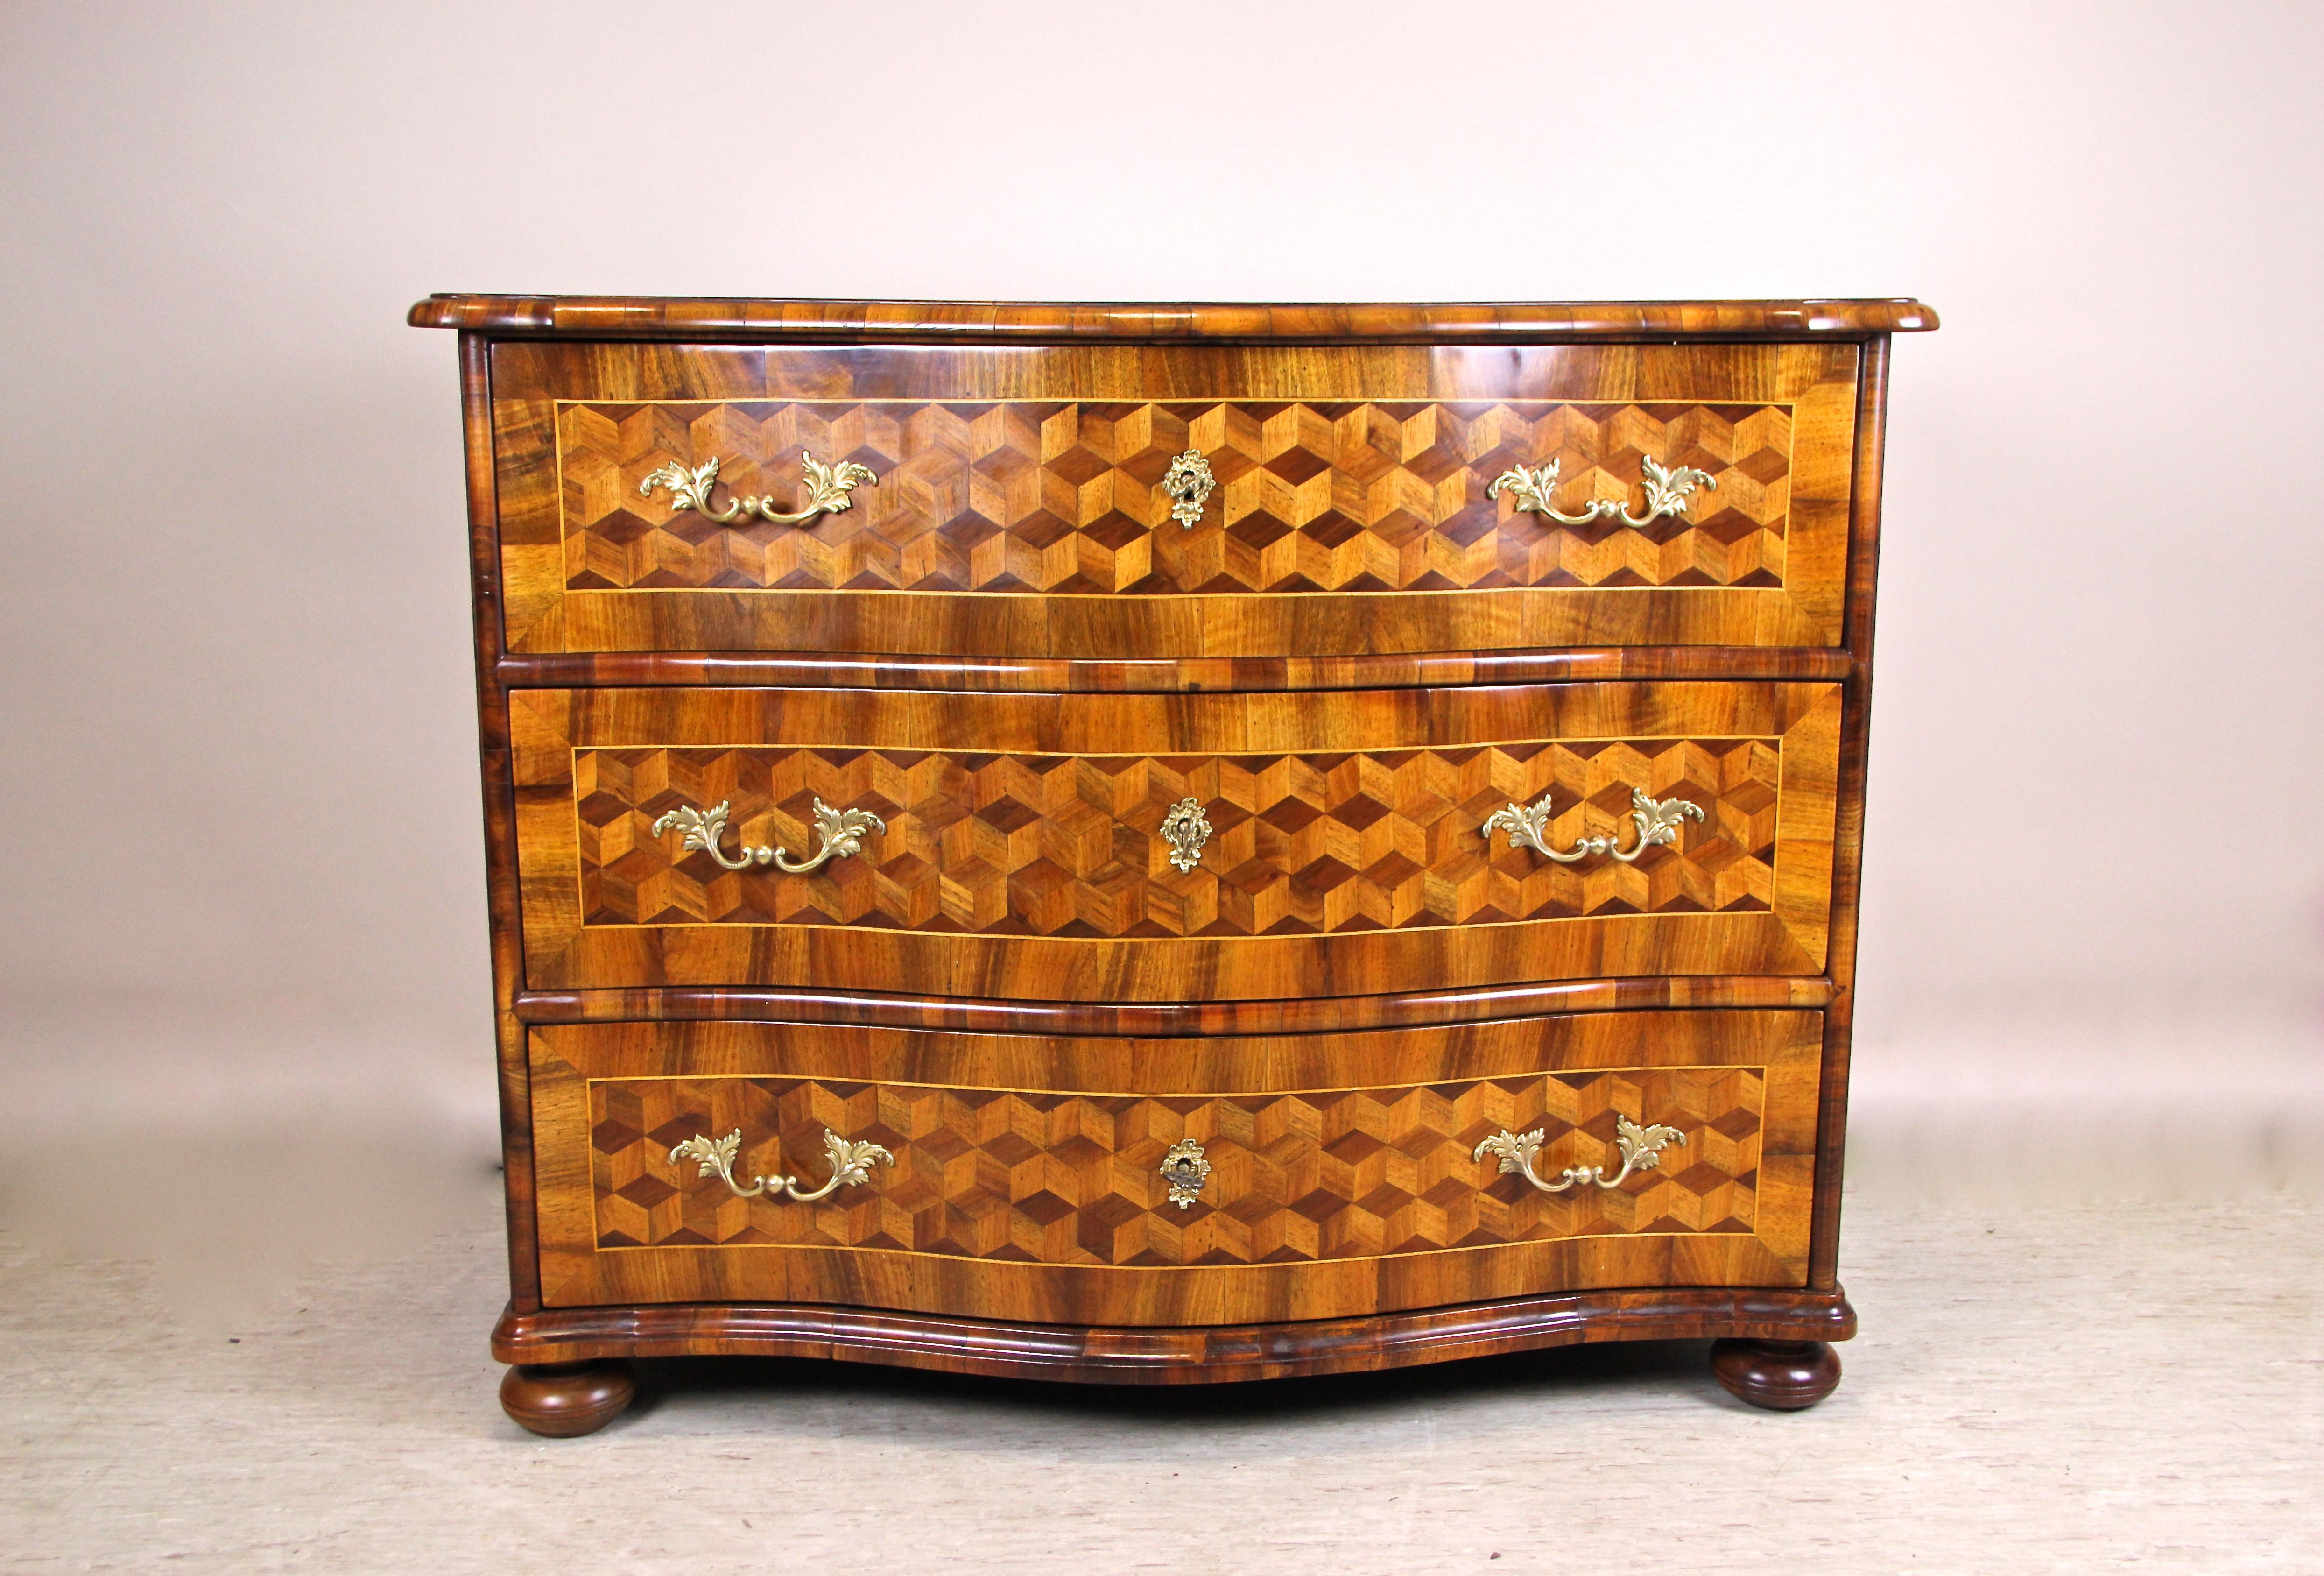 Absolute breathtaking Marquetry chest of drawers from the Baroque period in Austria circa 1760. This unique 18th century nut wood veneered Baroque chest impresses with a stunning cube-marquetry building an tremendous 3D effect. All marquetry